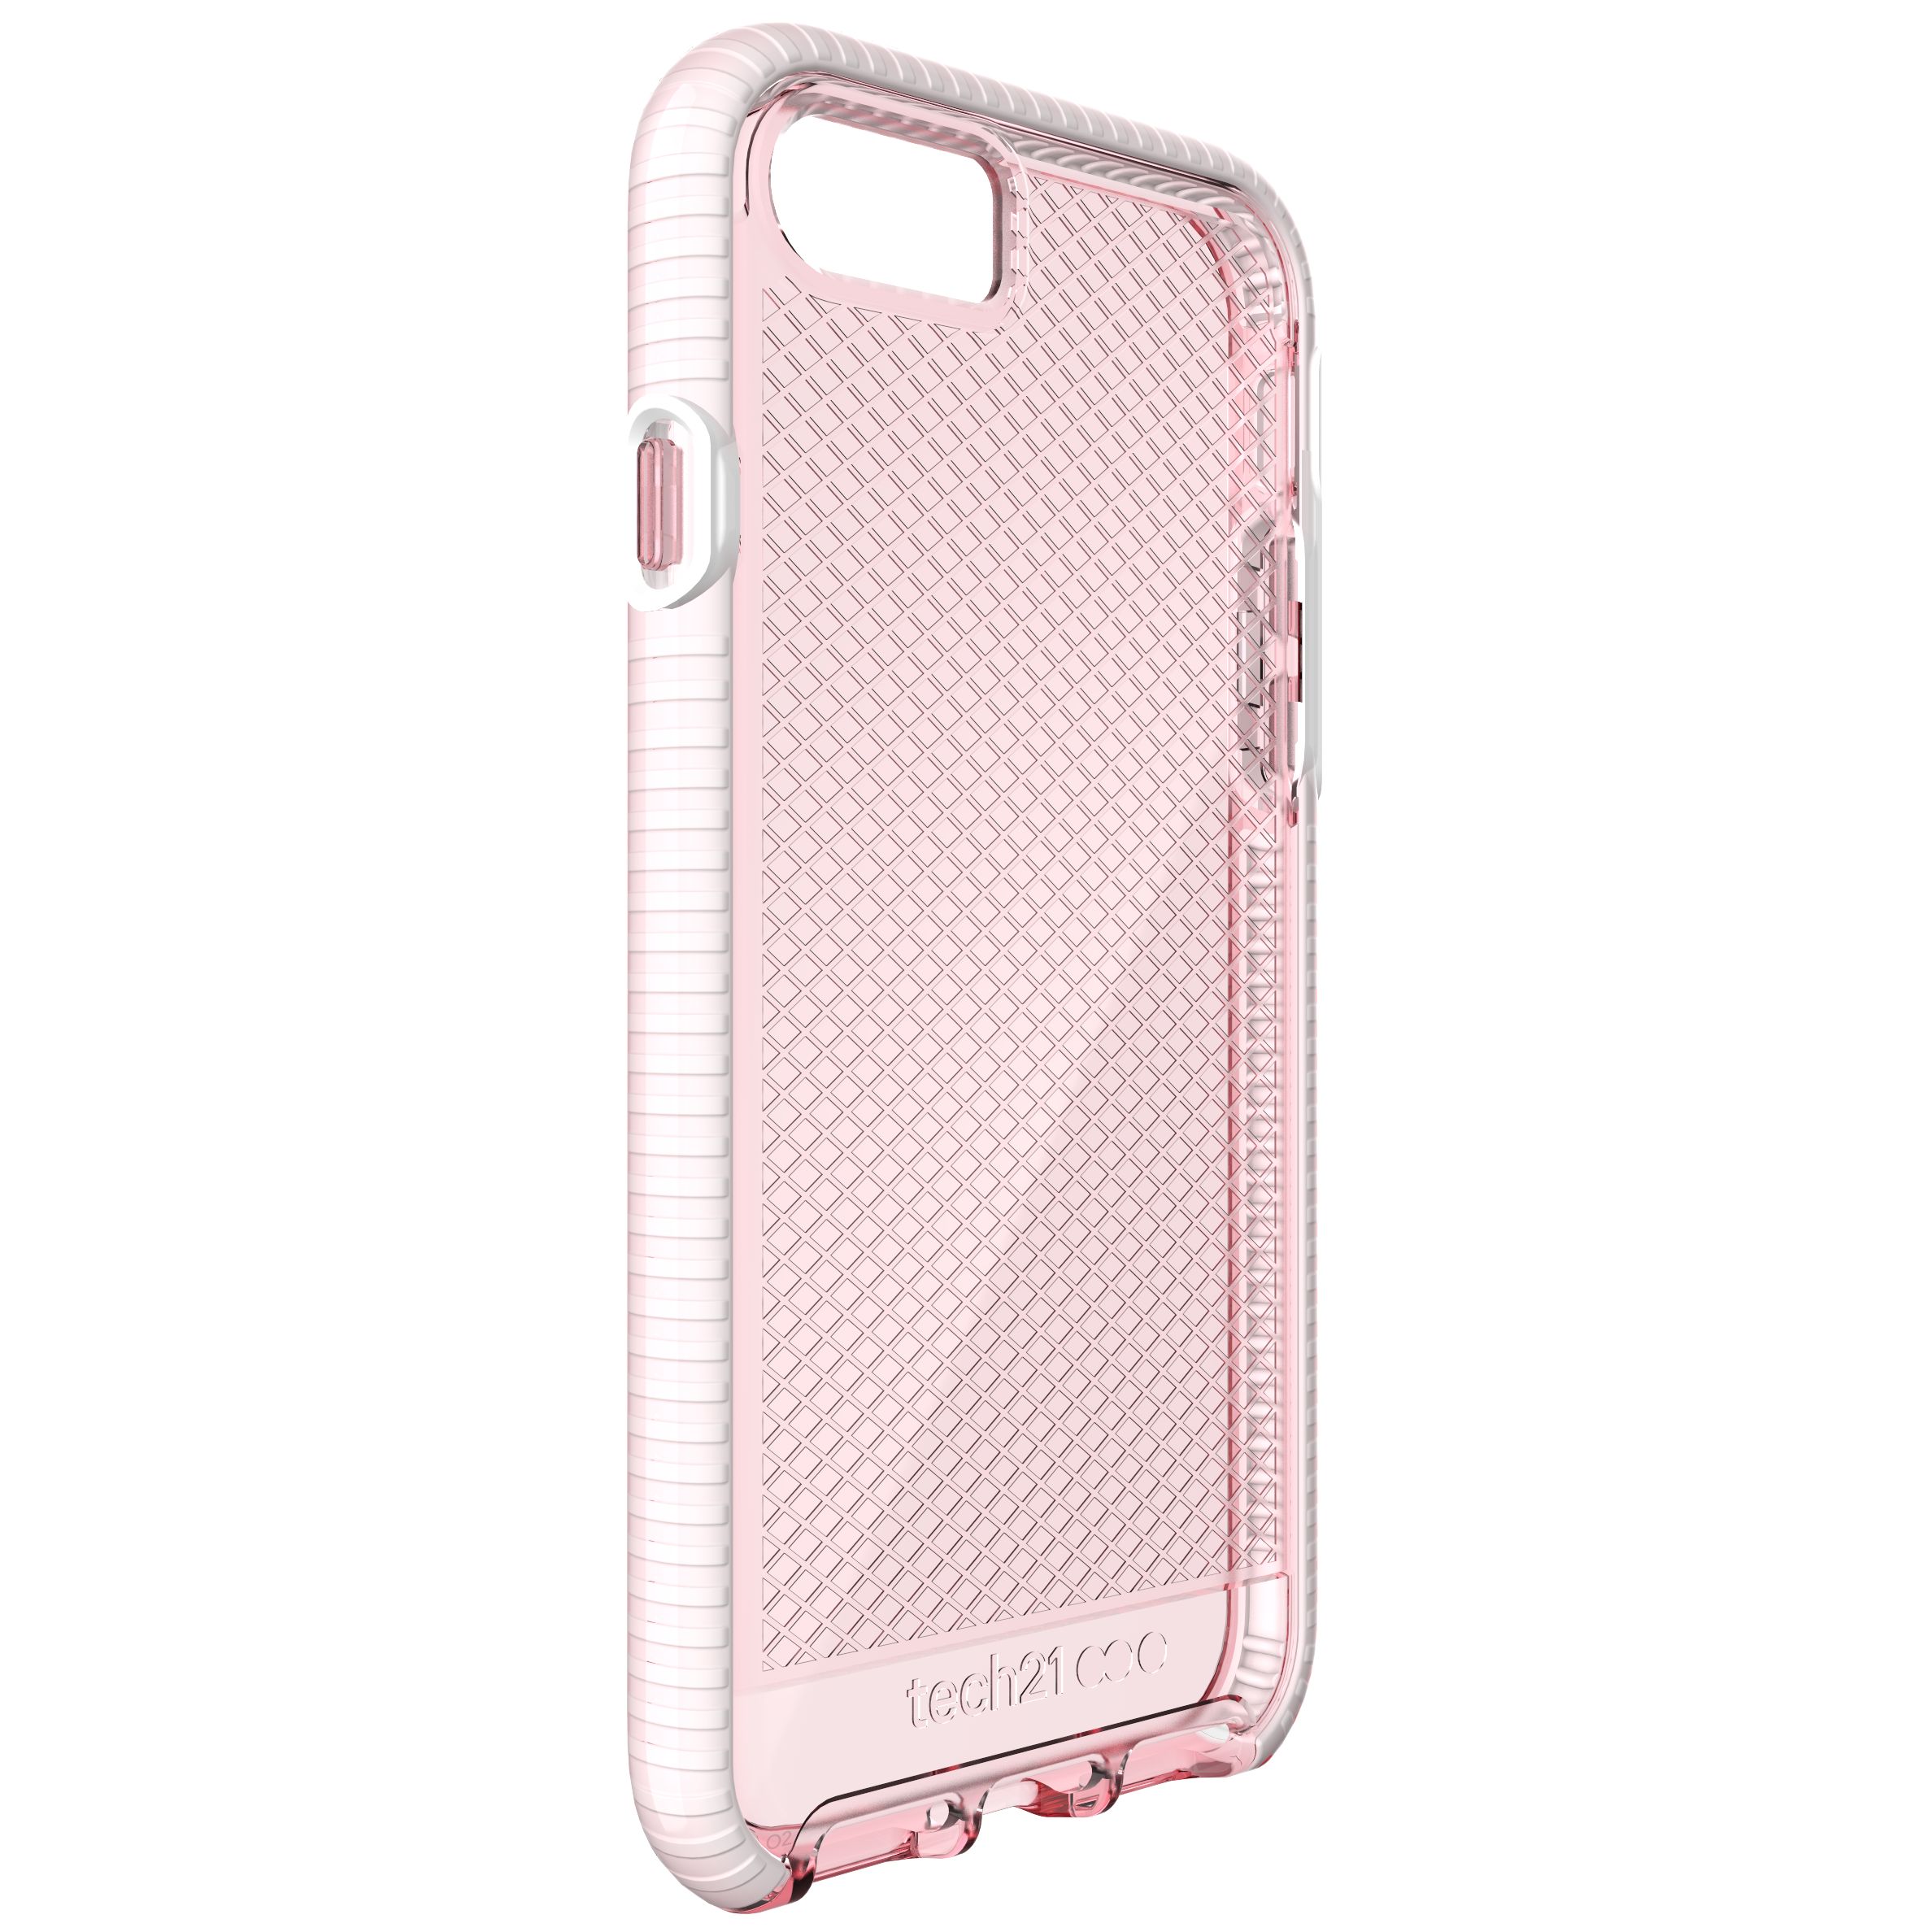 tech21 Evo Check Case for iPhone 7 and iPhone 8